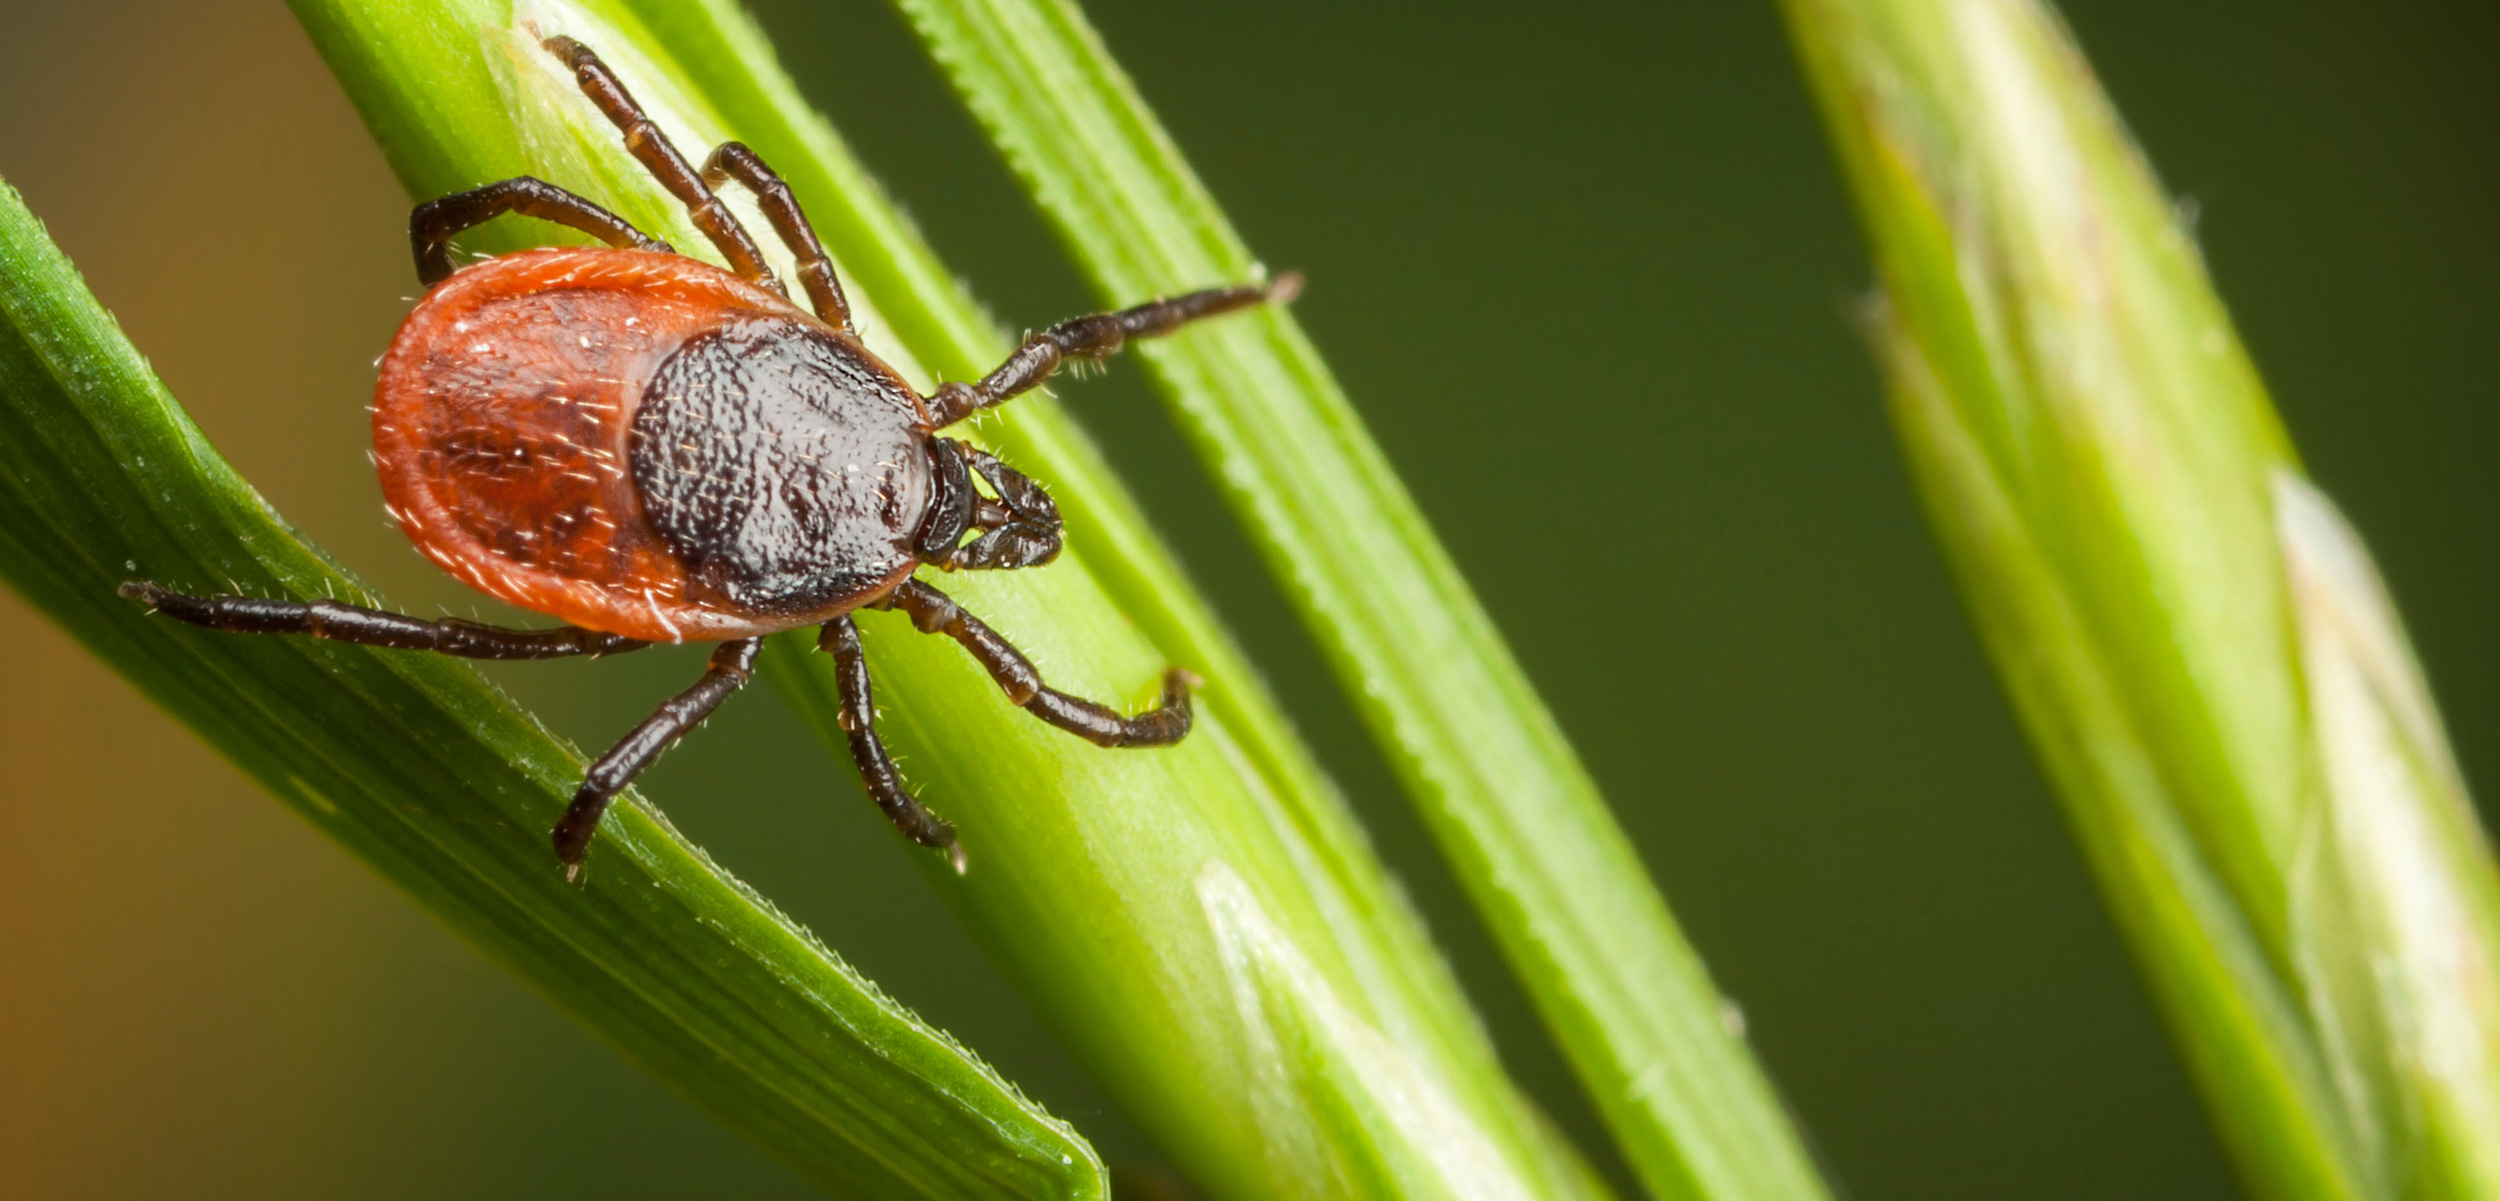 A deer tick infected with the Borrelia burgdorferi bacterium can cause Lyme disease in humans, typically after being attached to the body—often in hidden places, such as the groin, armpits, or scalp—for 36 to 48 hours. Photo by Risto Hunt/Alamy Stock Photo